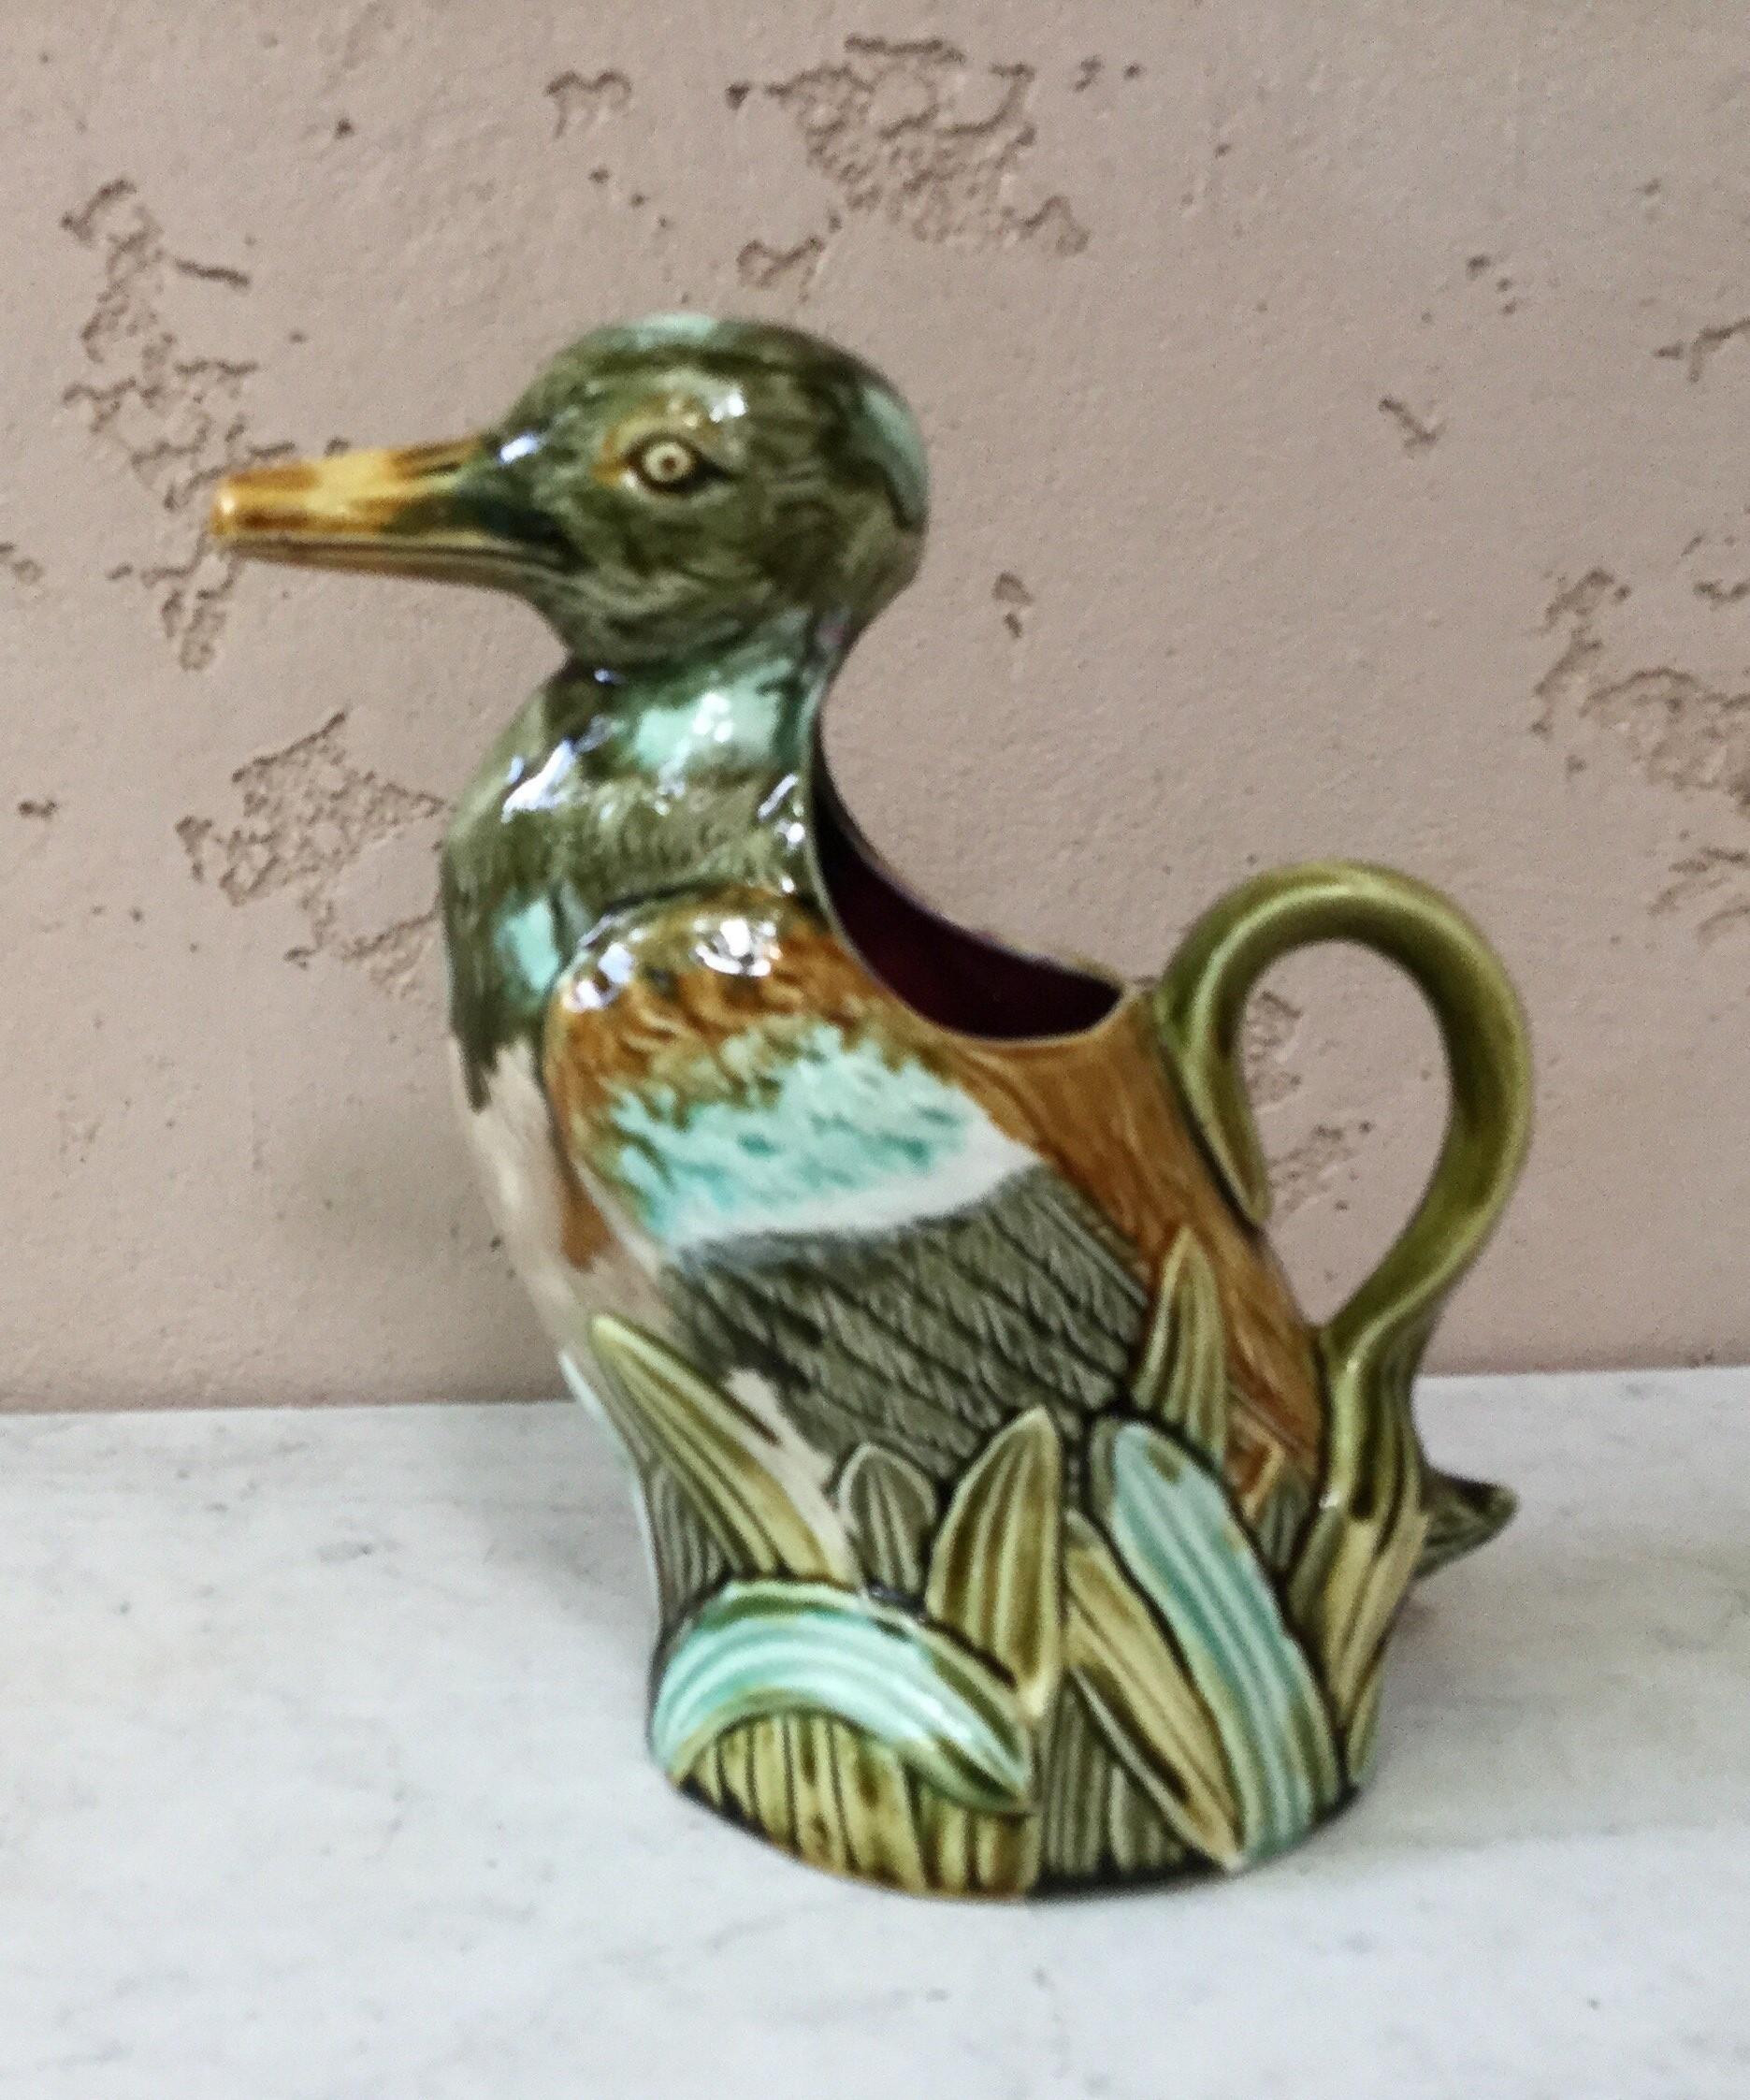 French rustic majolica duck pitcher signed Onnaing, circa 1890.